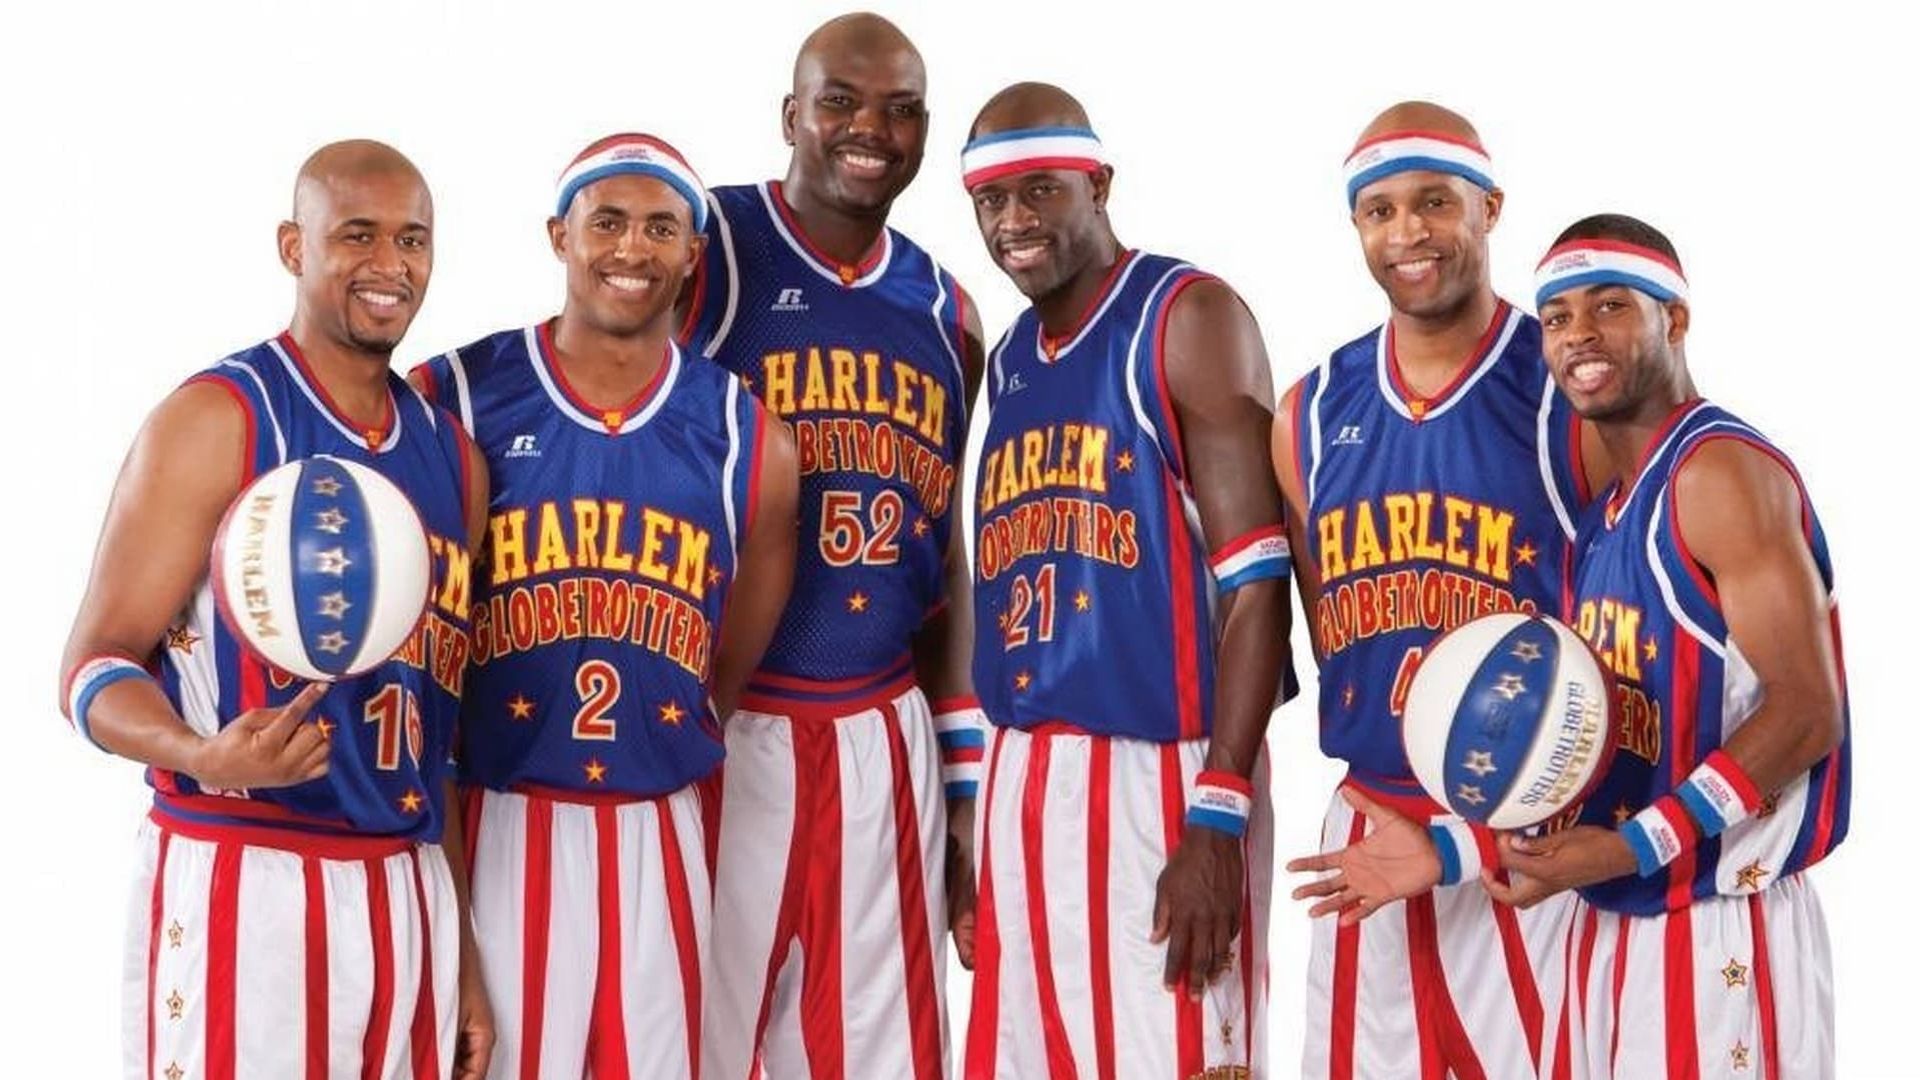 The Harlem Globetrotters: The Team That Changed the World background